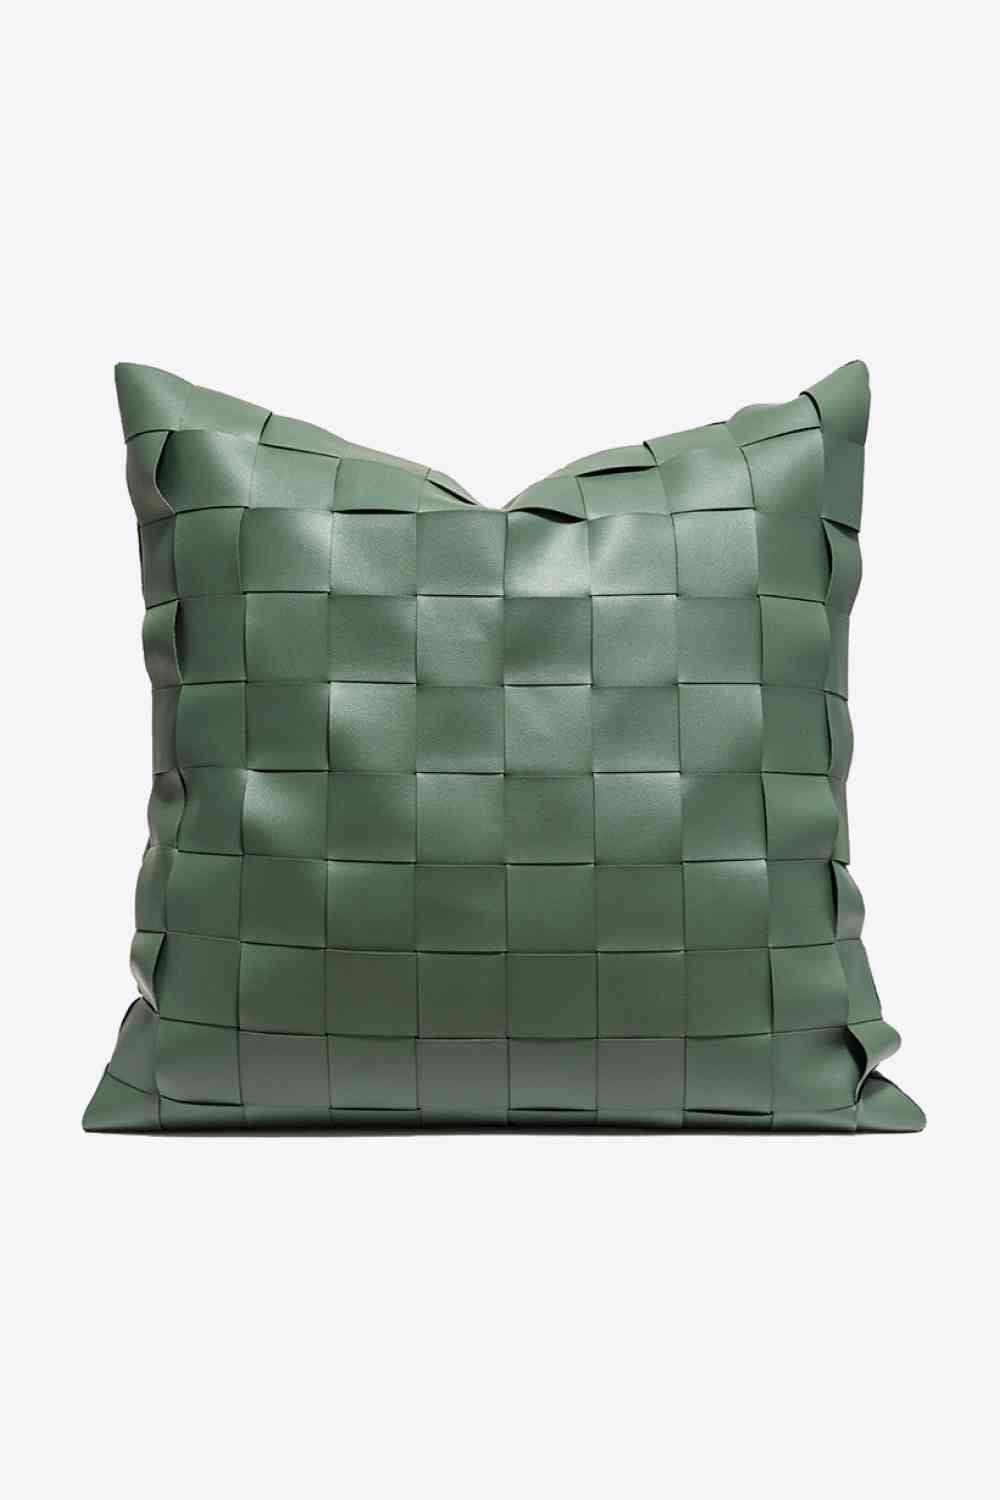 4-Pack Zip Closure Decorative Throw Pillow Cases - Decorative Pillowcases - Tophatter's Smashing Daily Deals | We're Against Forced Labor in China